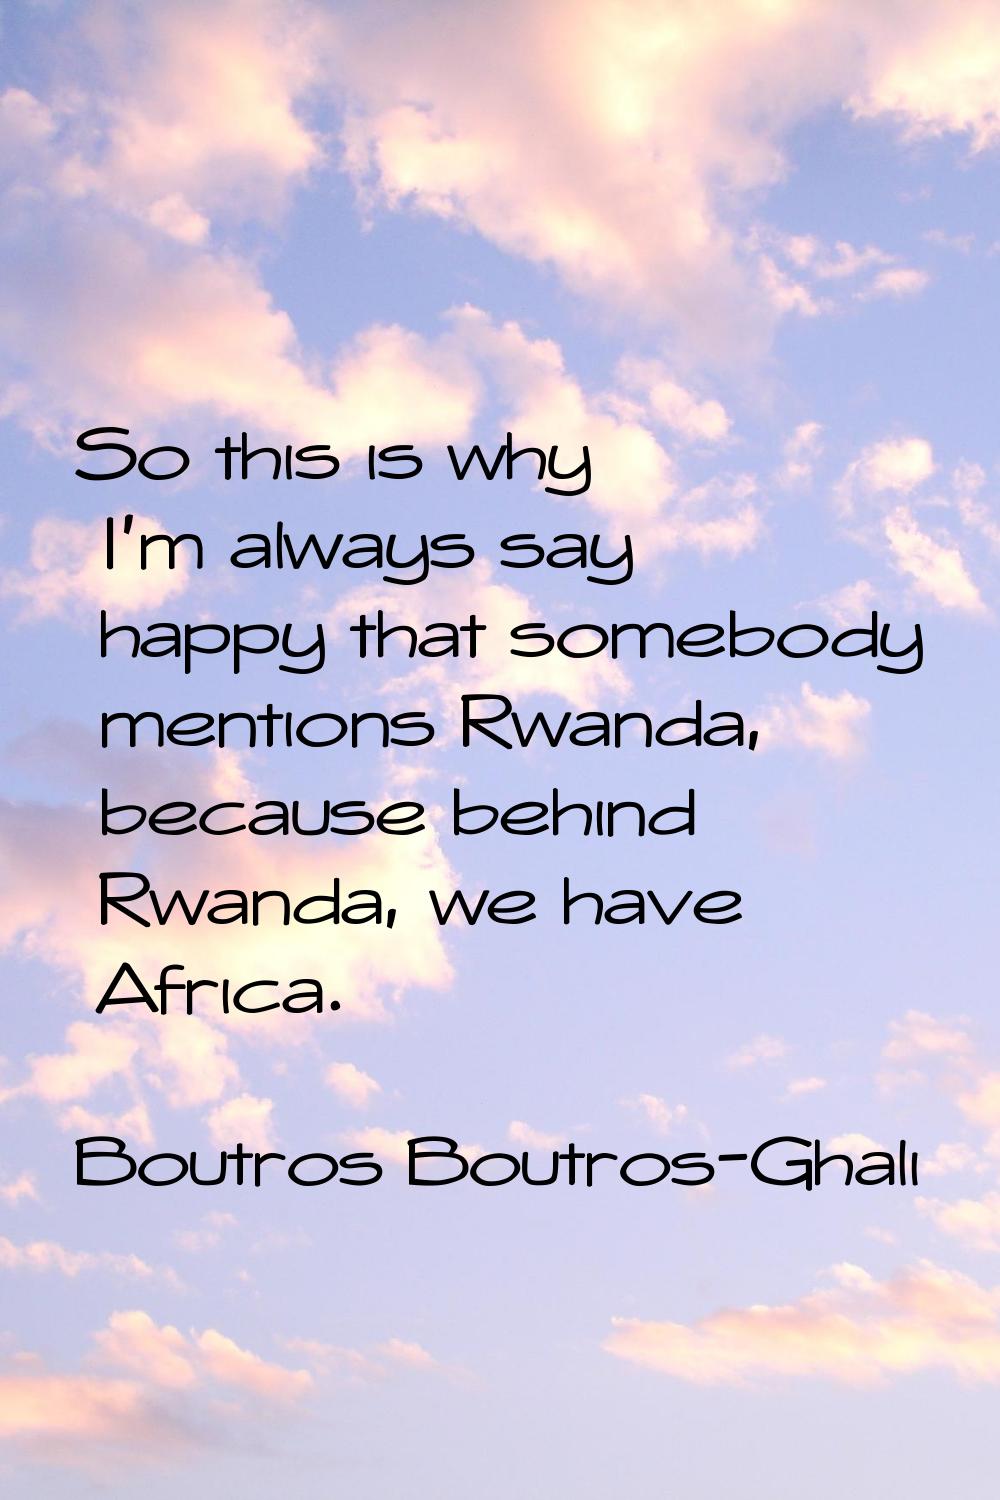 So this is why I'm always say happy that somebody mentions Rwanda, because behind Rwanda, we have A